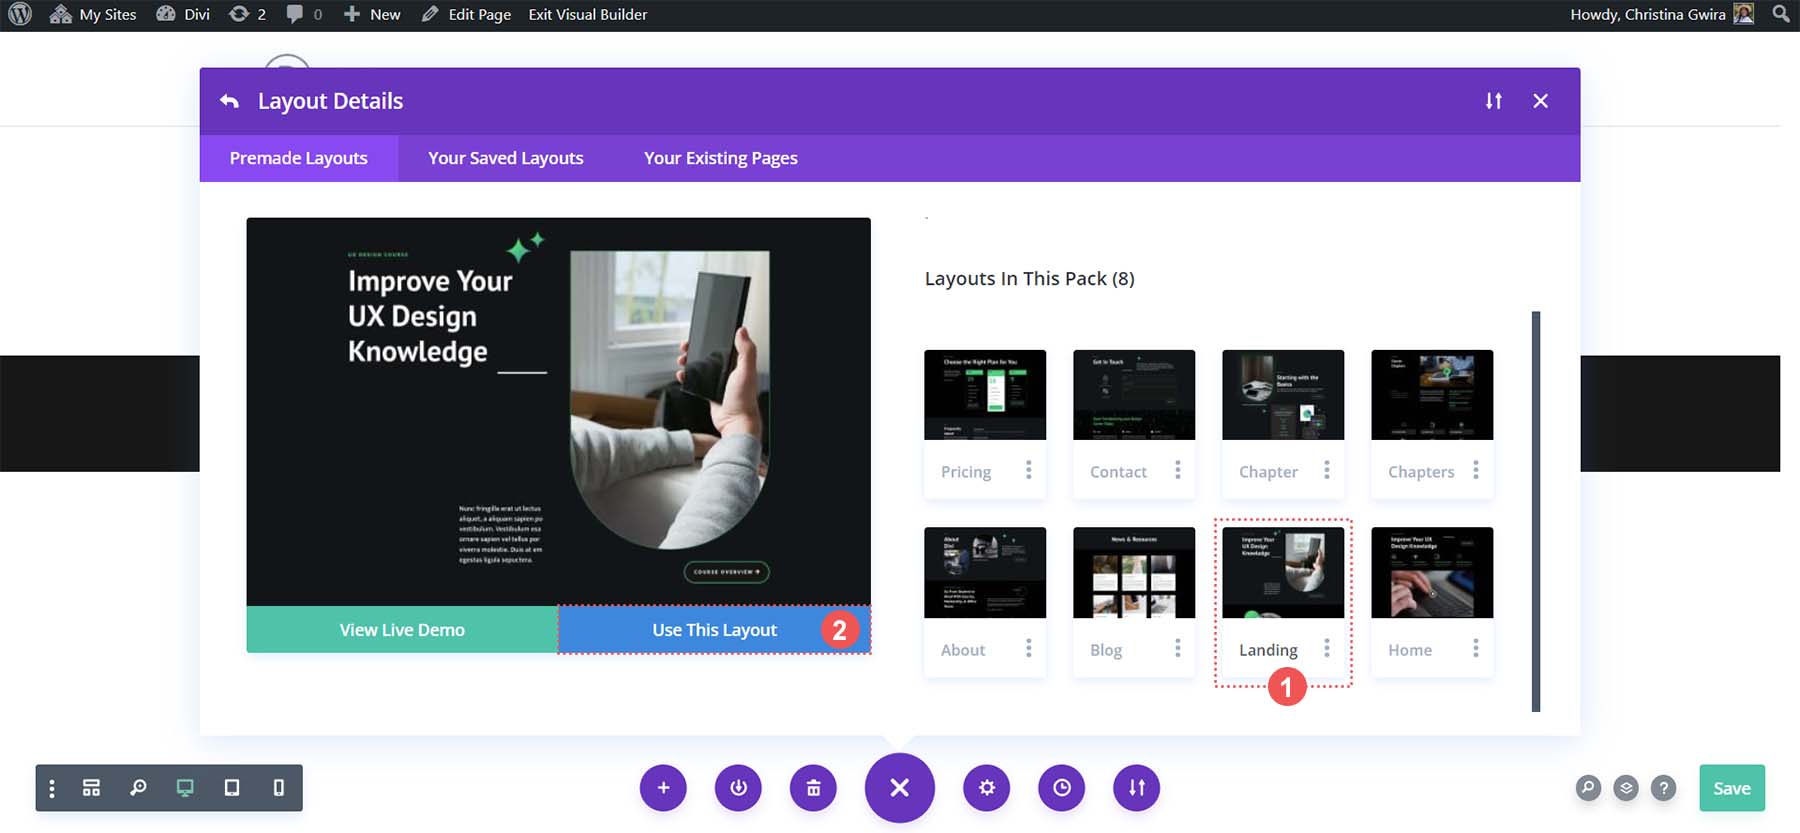 Use landing page layout from the Online Course layout pack